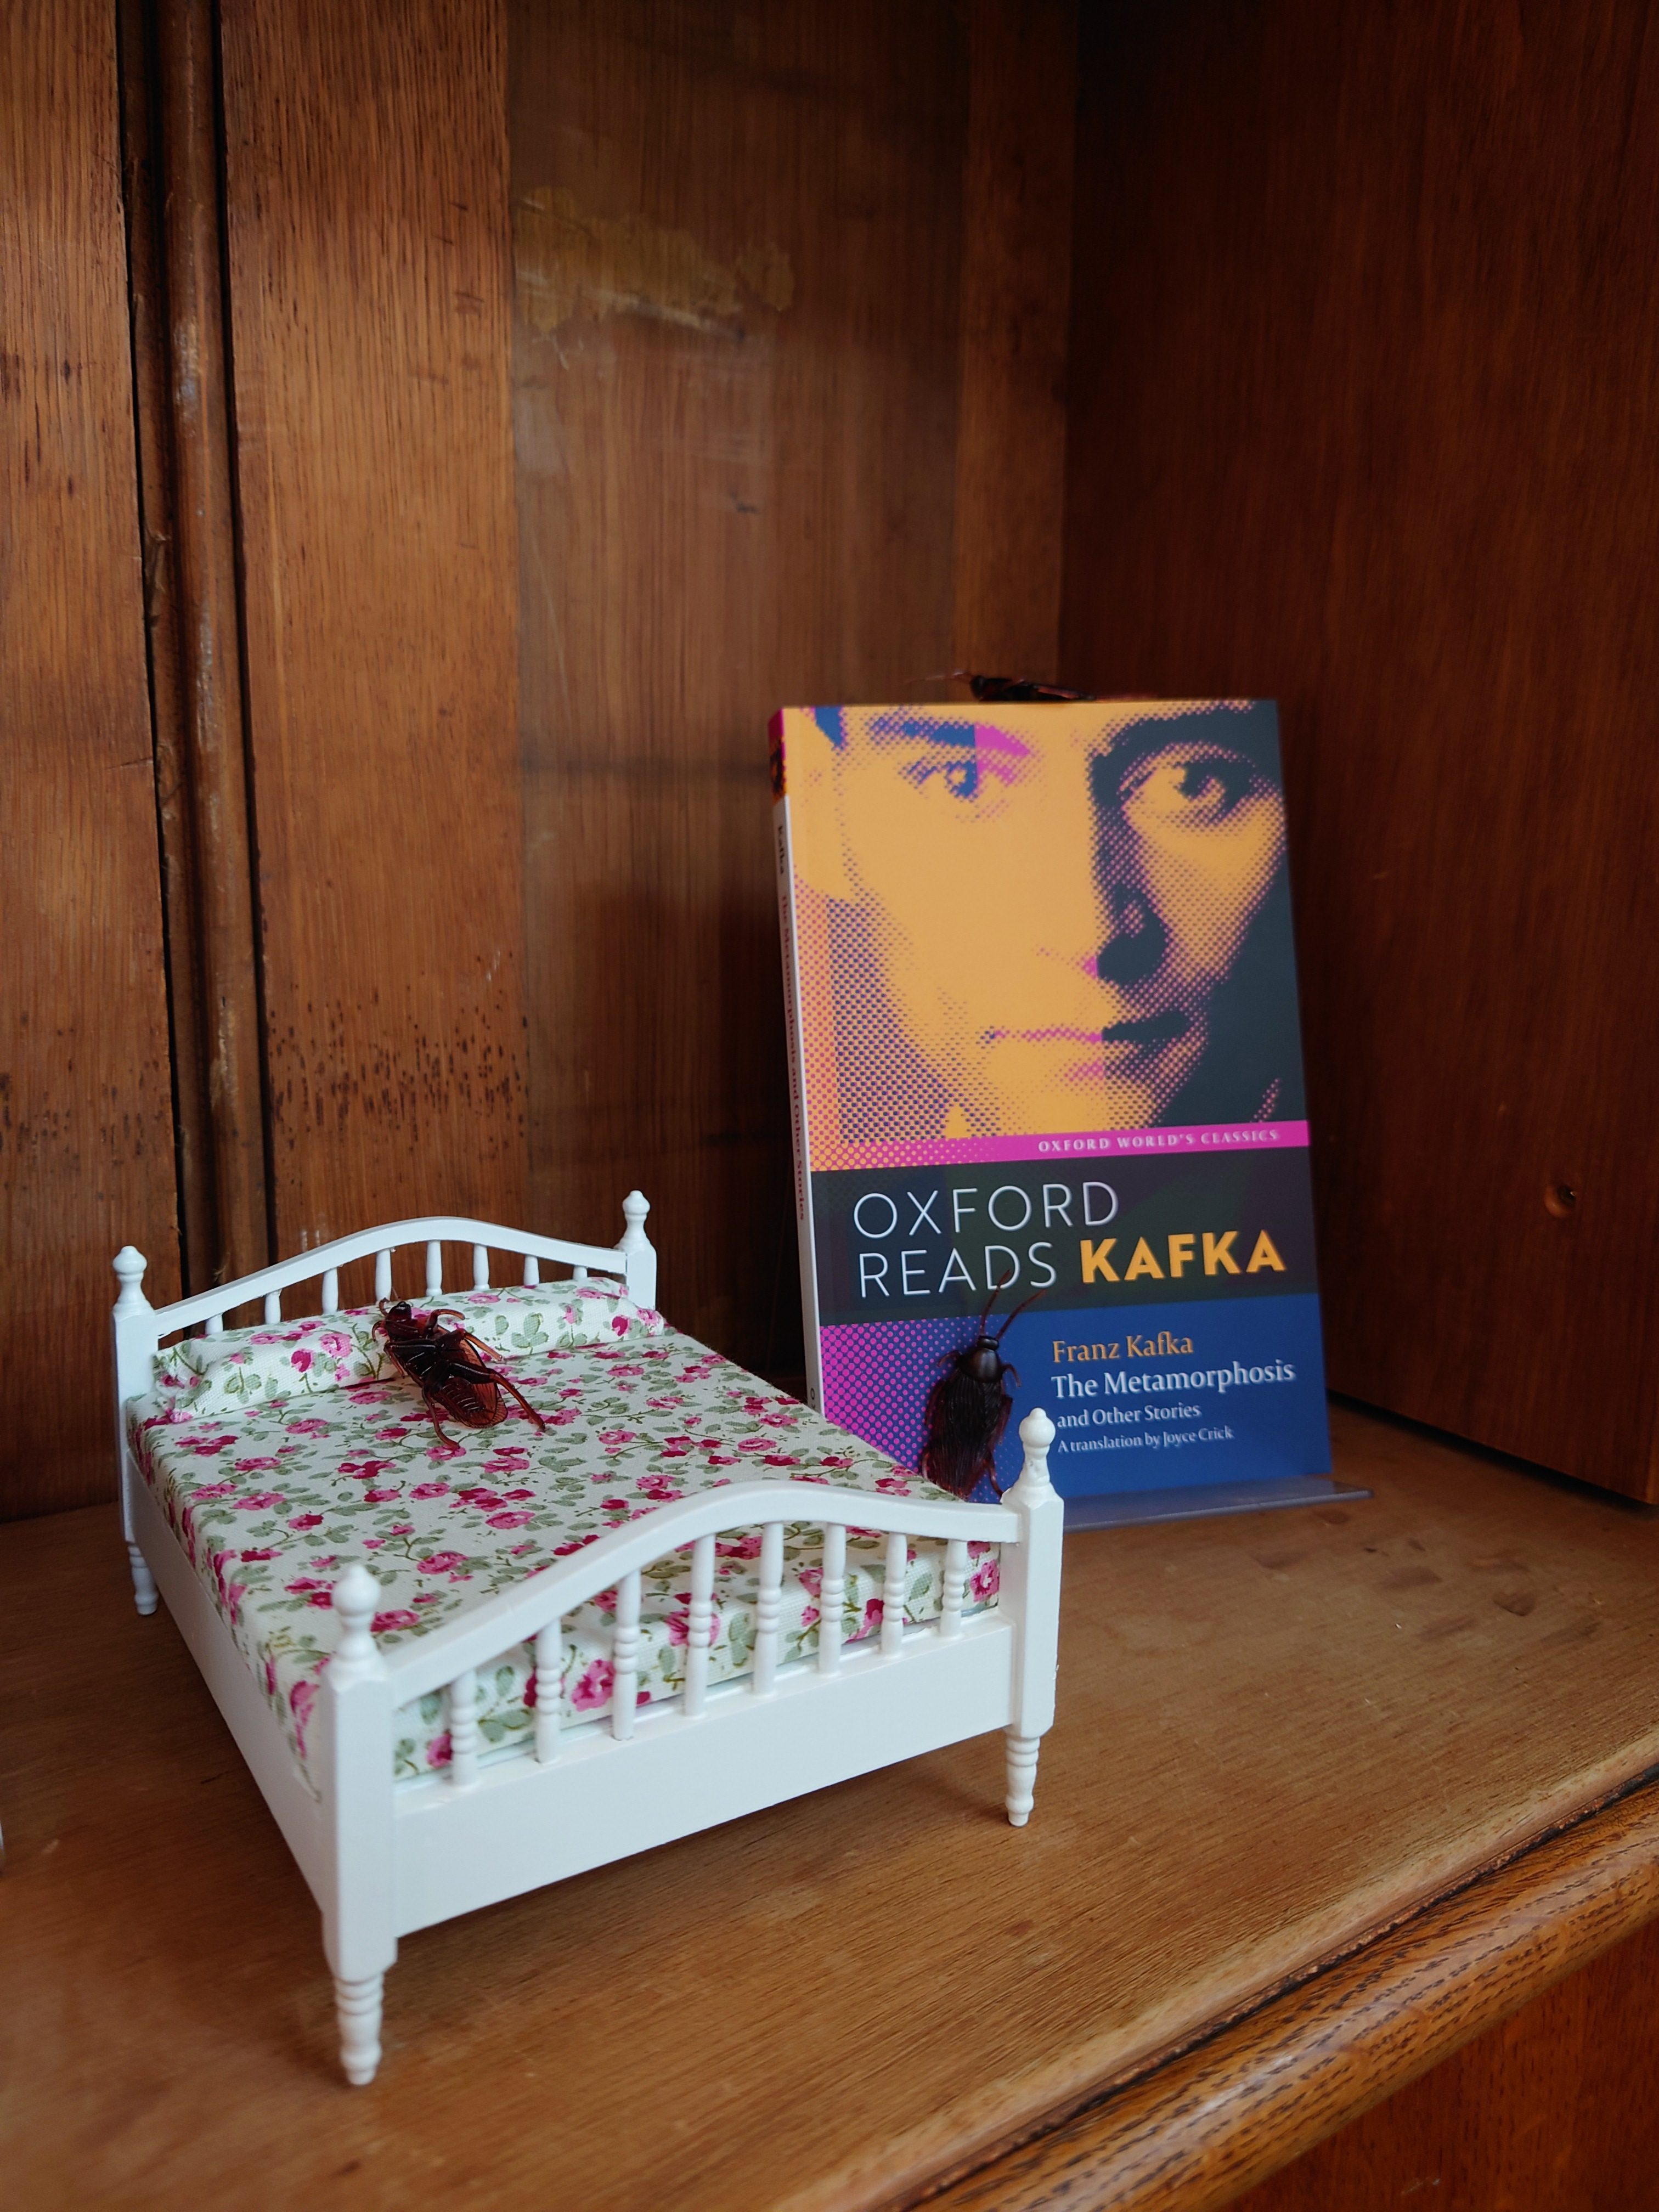 A display in the library with a miniature bed with a bug on top next to a copy of Franz Kafka's book Metamorphosis